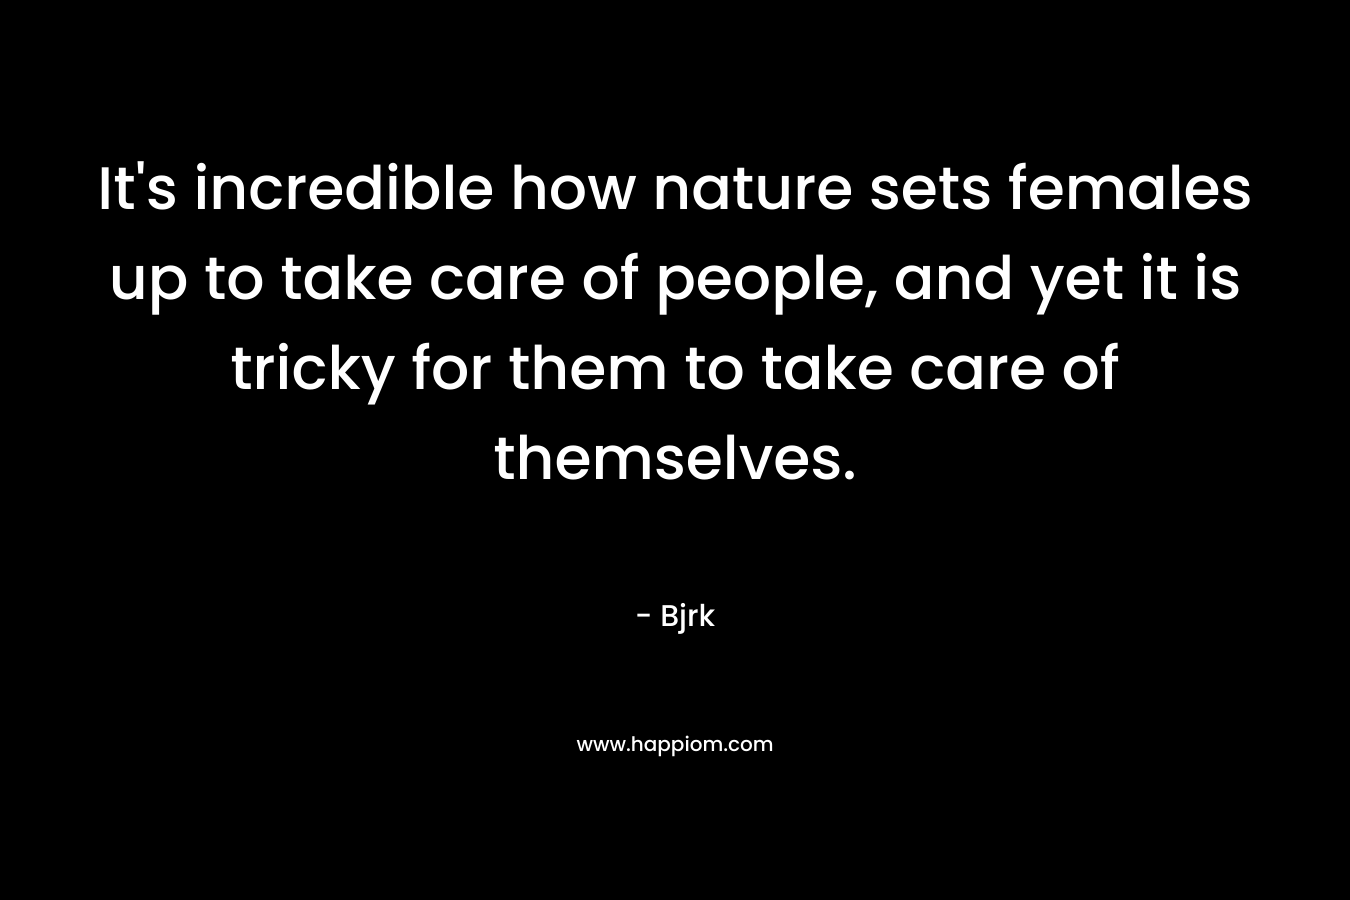 It's incredible how nature sets females up to take care of people, and yet it is tricky for them to take care of themselves.